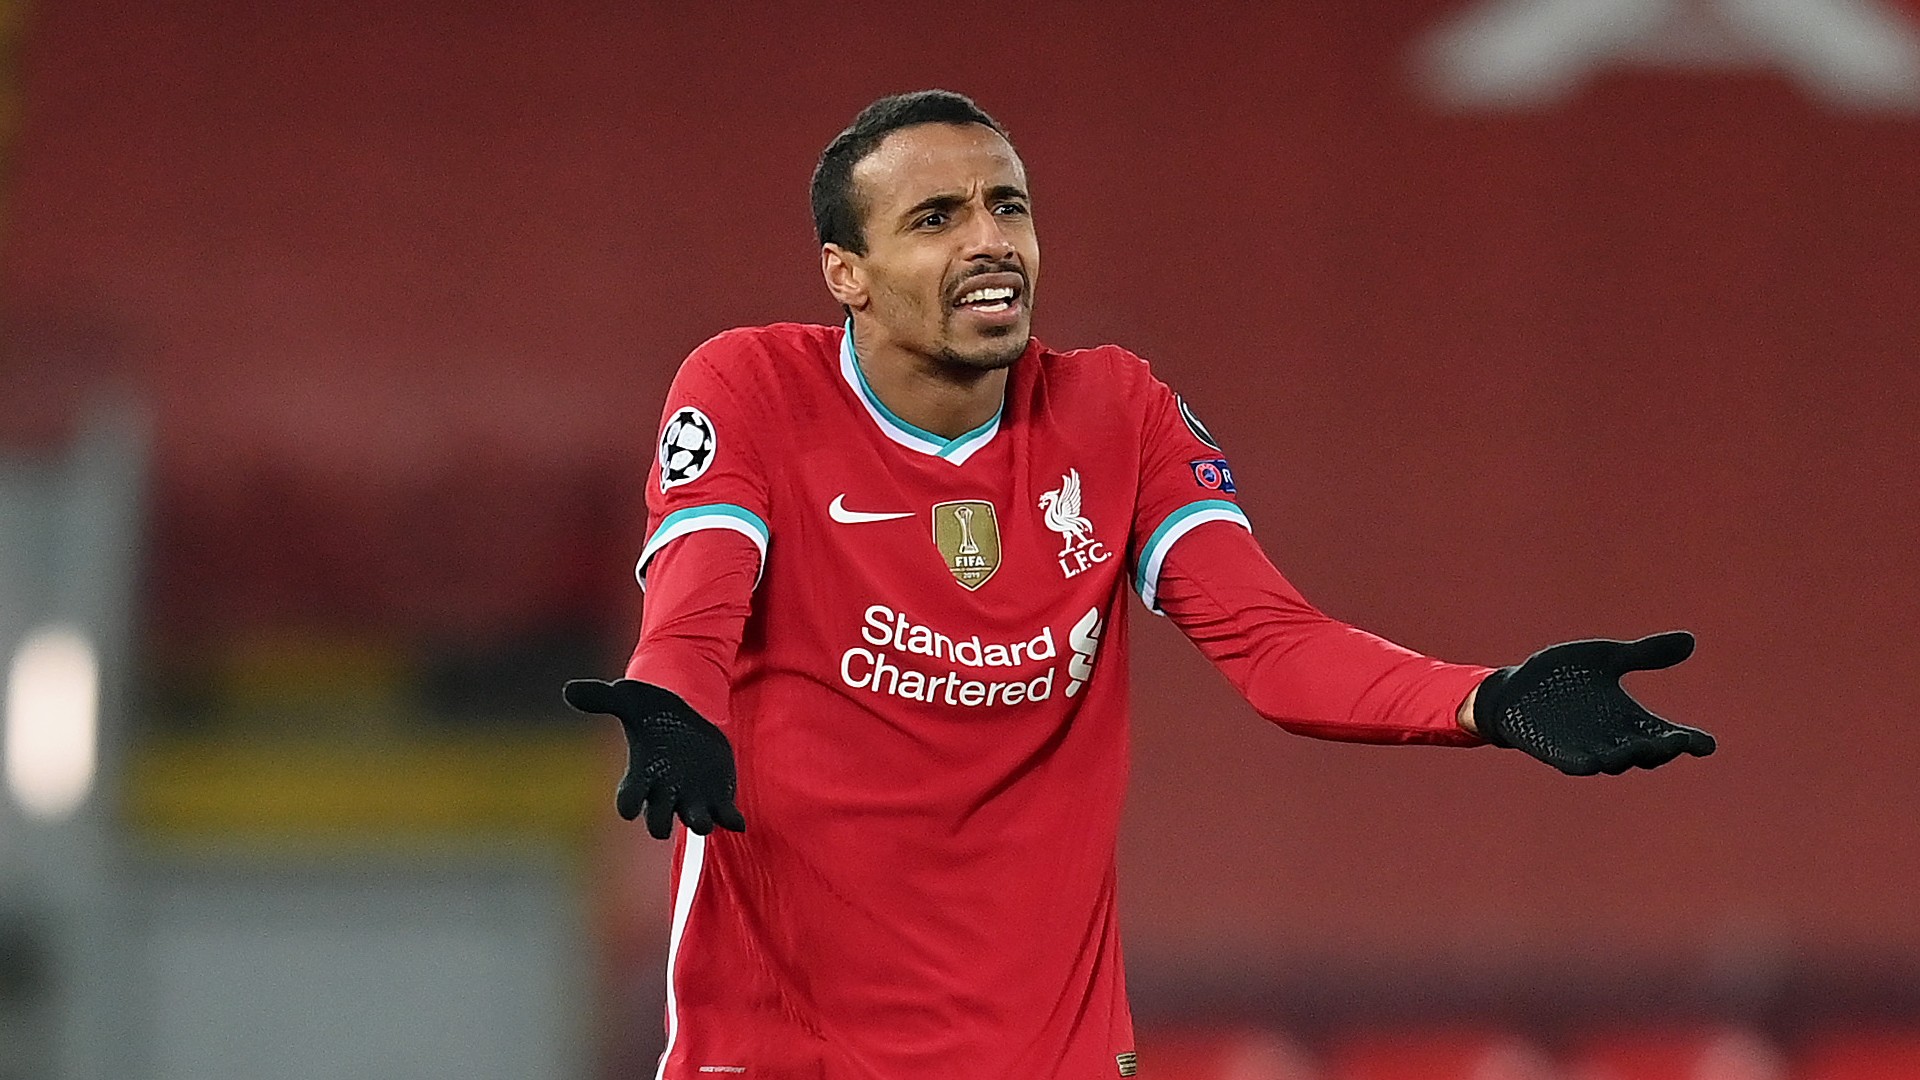 Klopp confirms Liverpool defender Matip is set to miss three weeks with groin injury